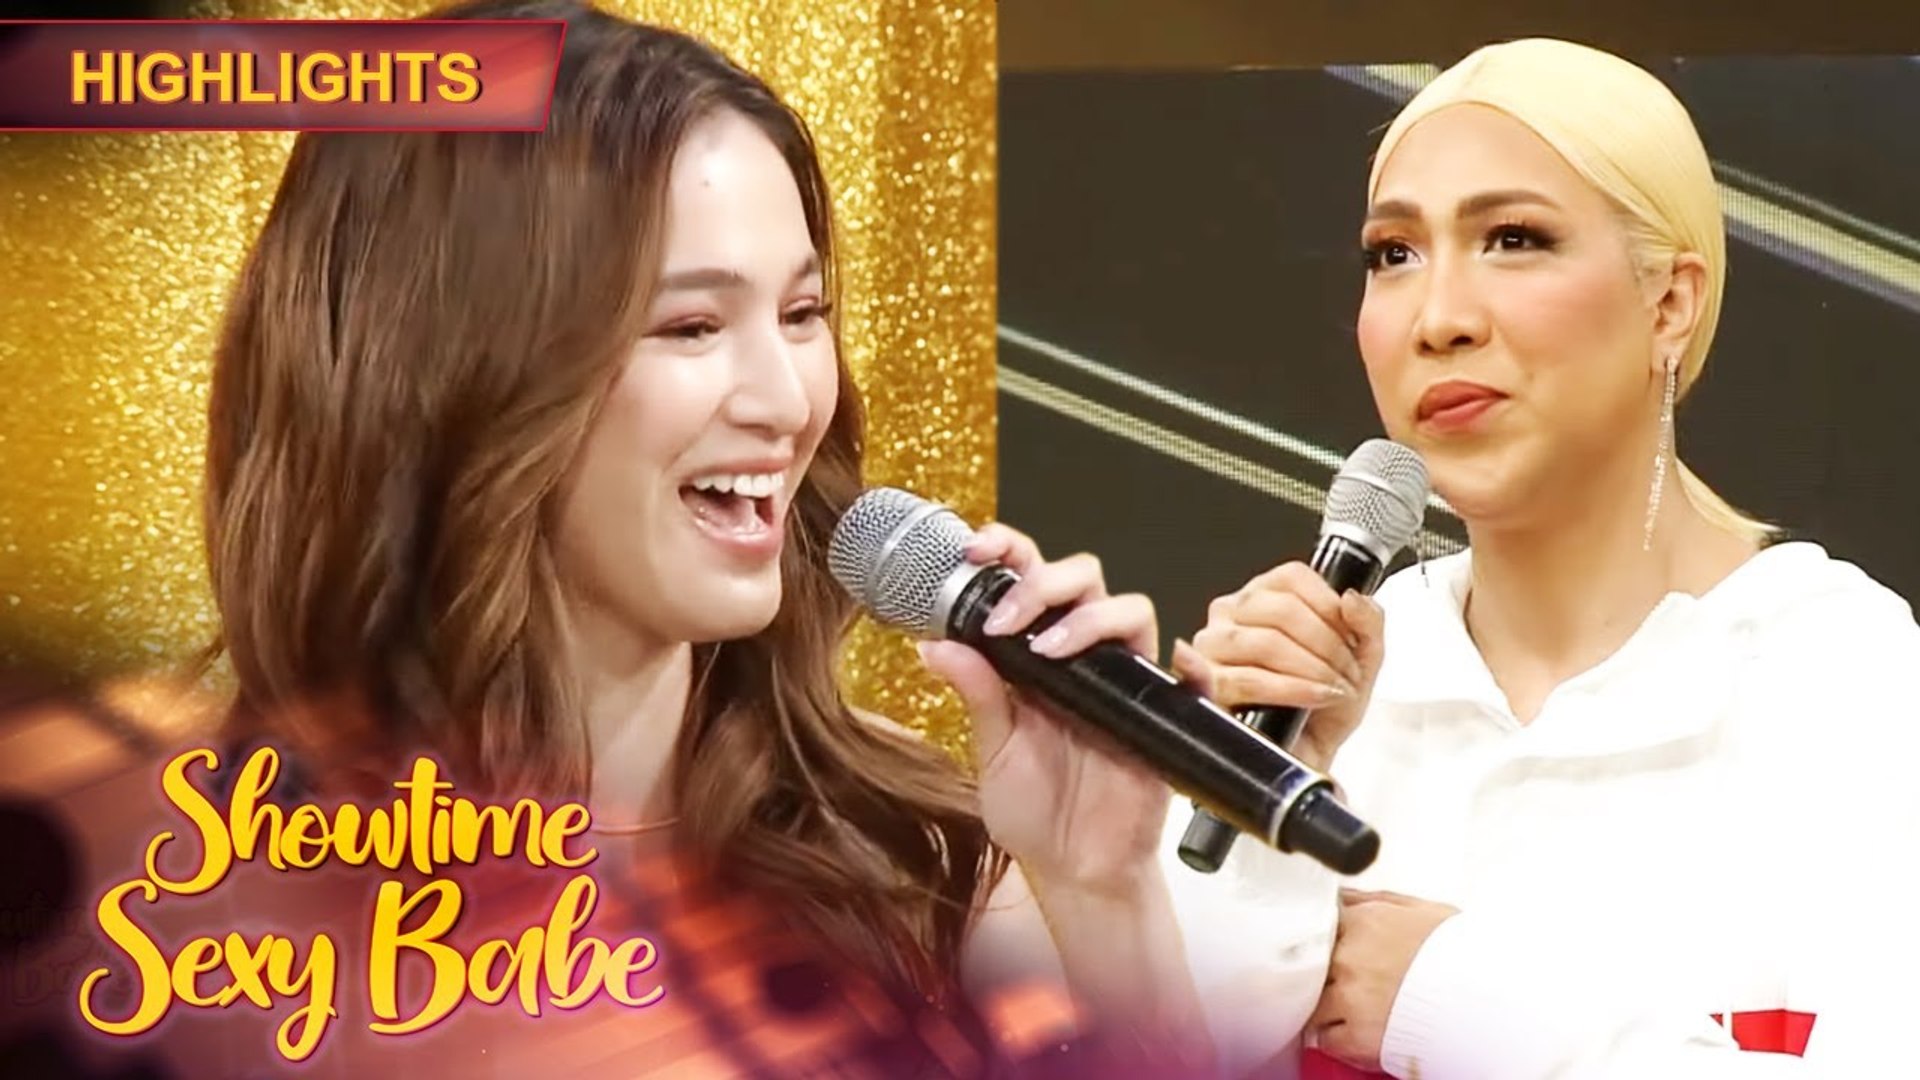 Vice Ganda pokes fun at Anne Curtis' revealing outfit on It's Showtime